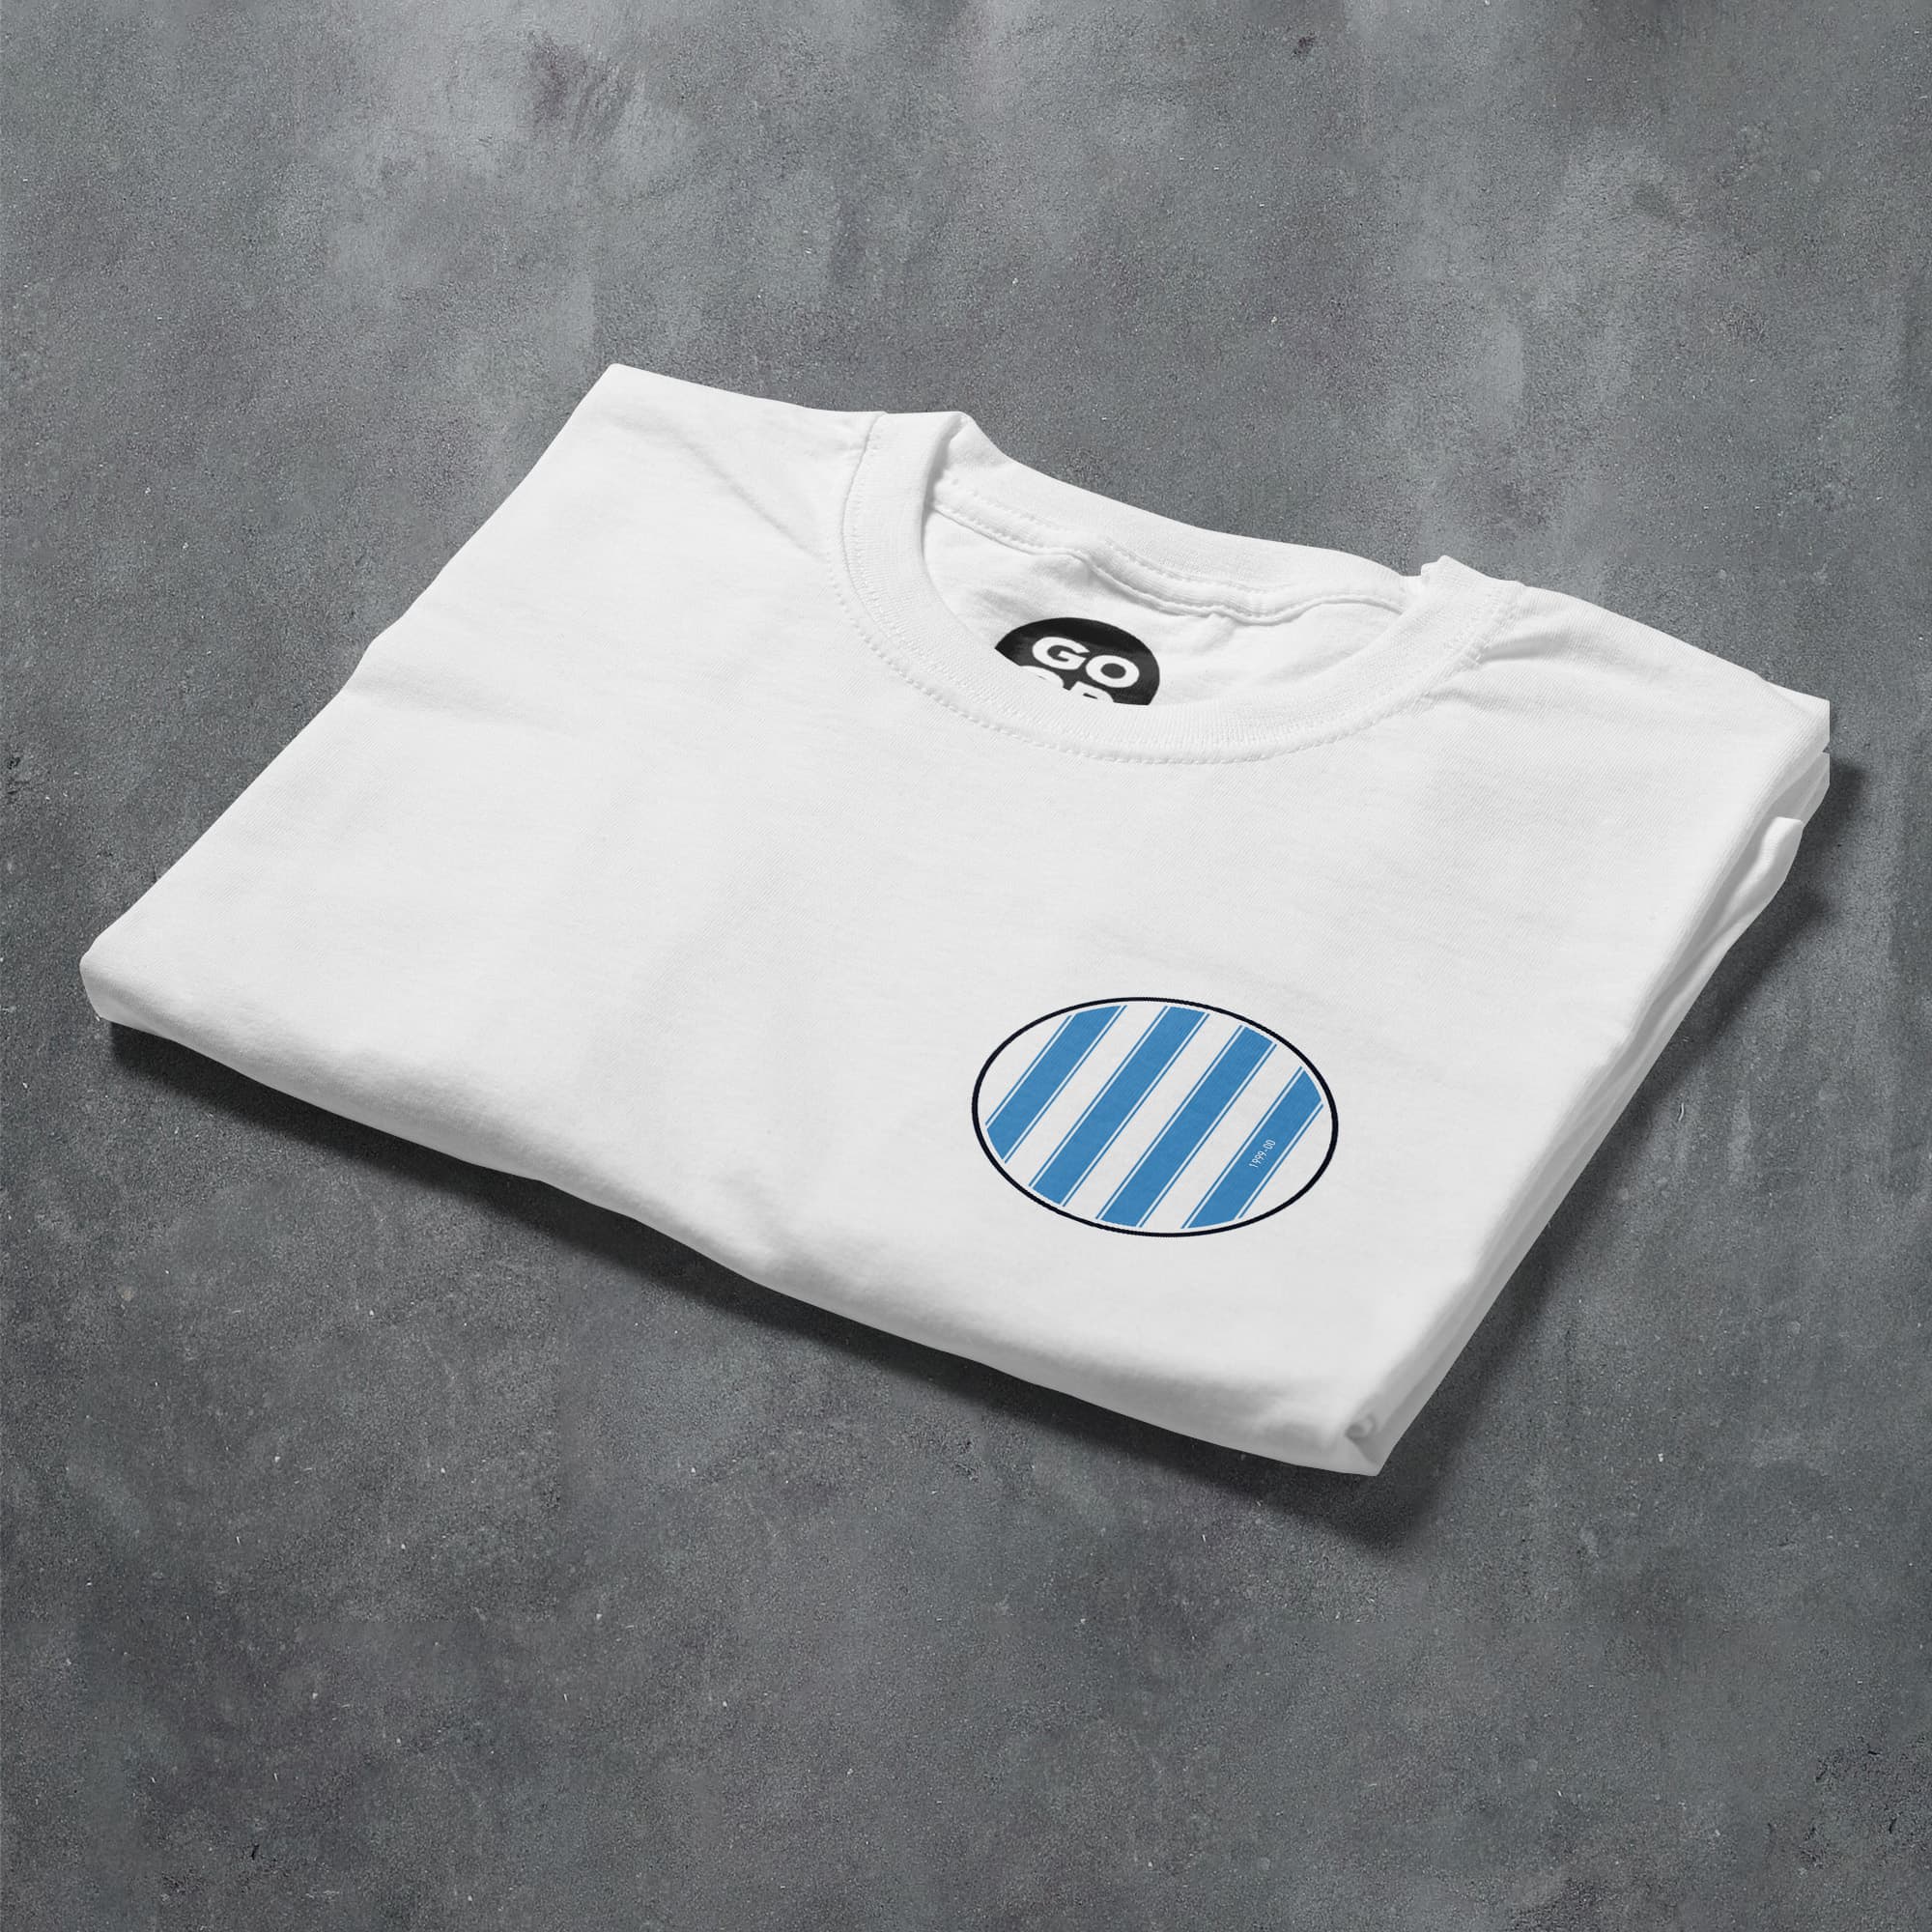 a white t - shirt with blue and white stripes on it